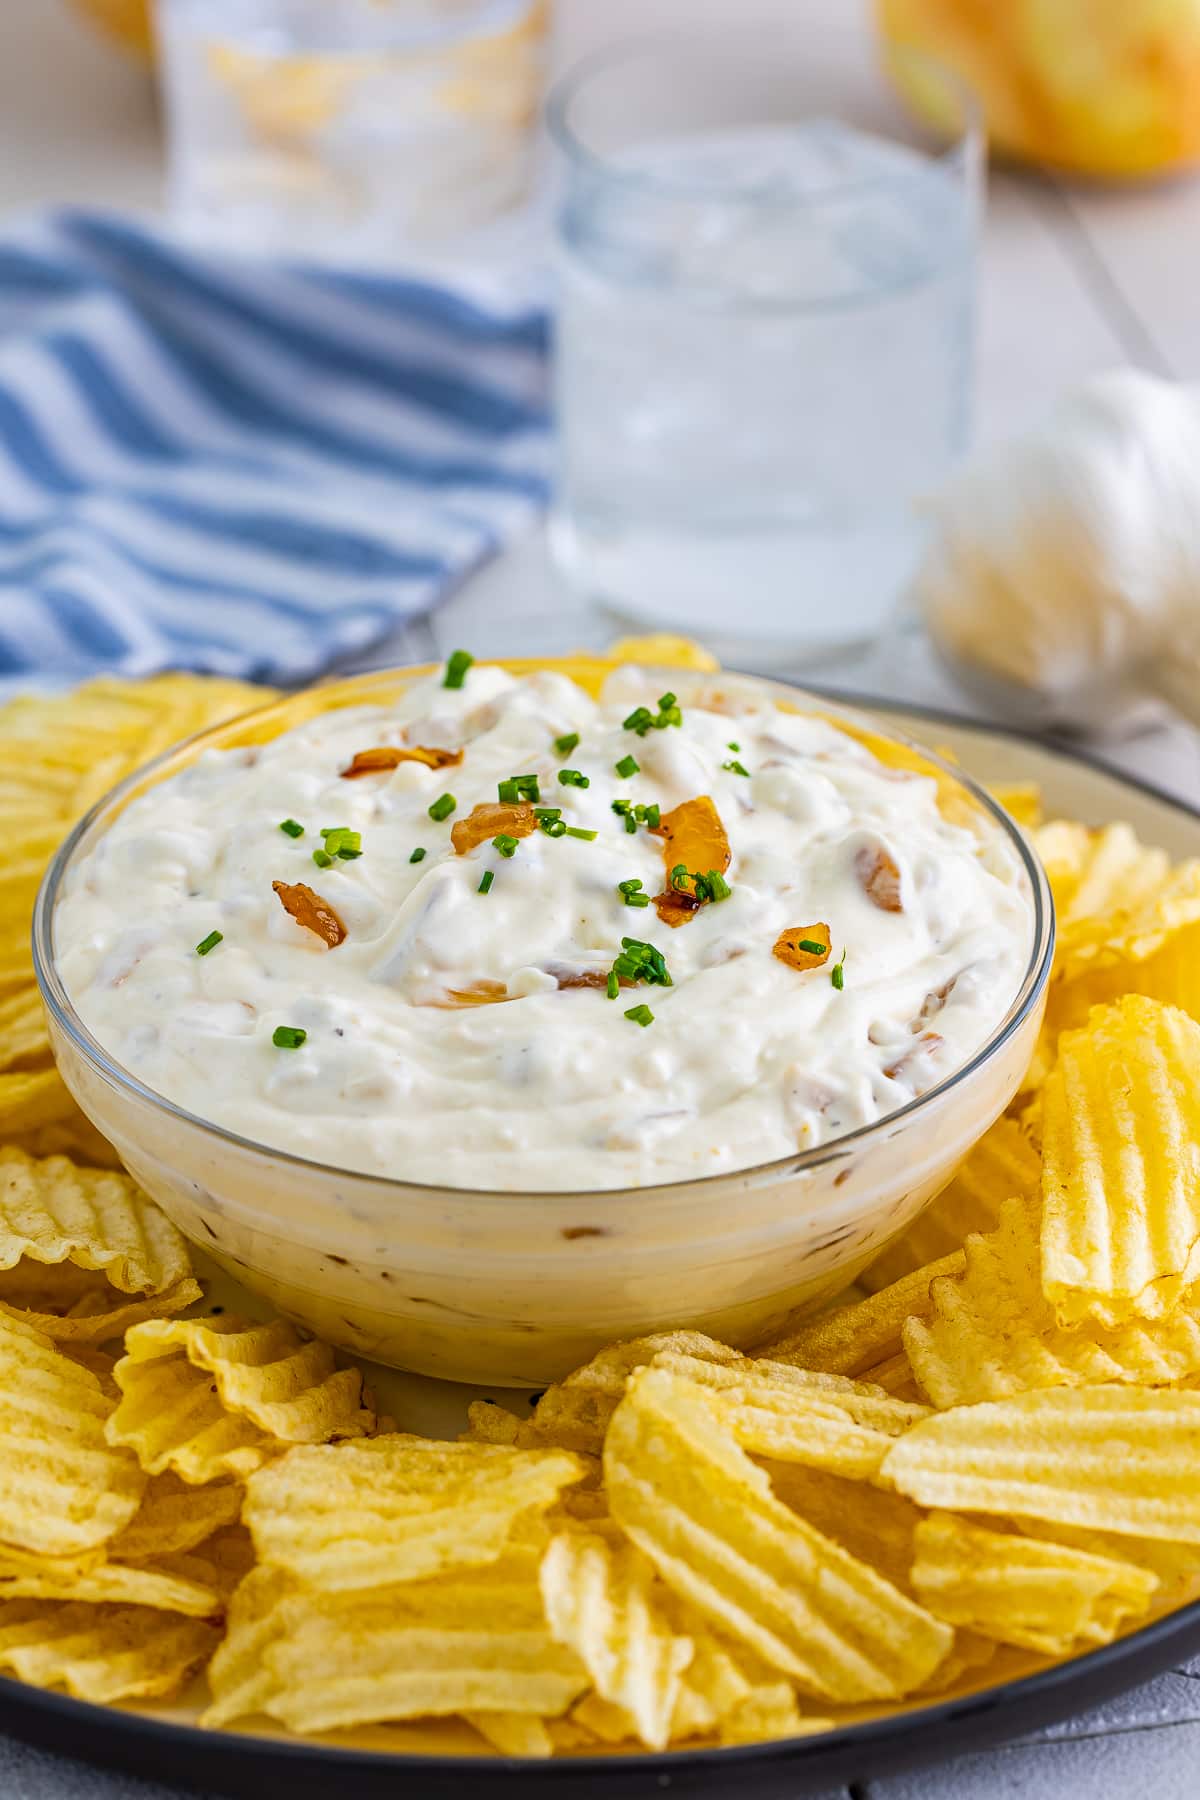 French Onion Dip Recipe in a clear glass bowl surrounded by wavy potato chips with glass of water and blue striped linen straight on angle.